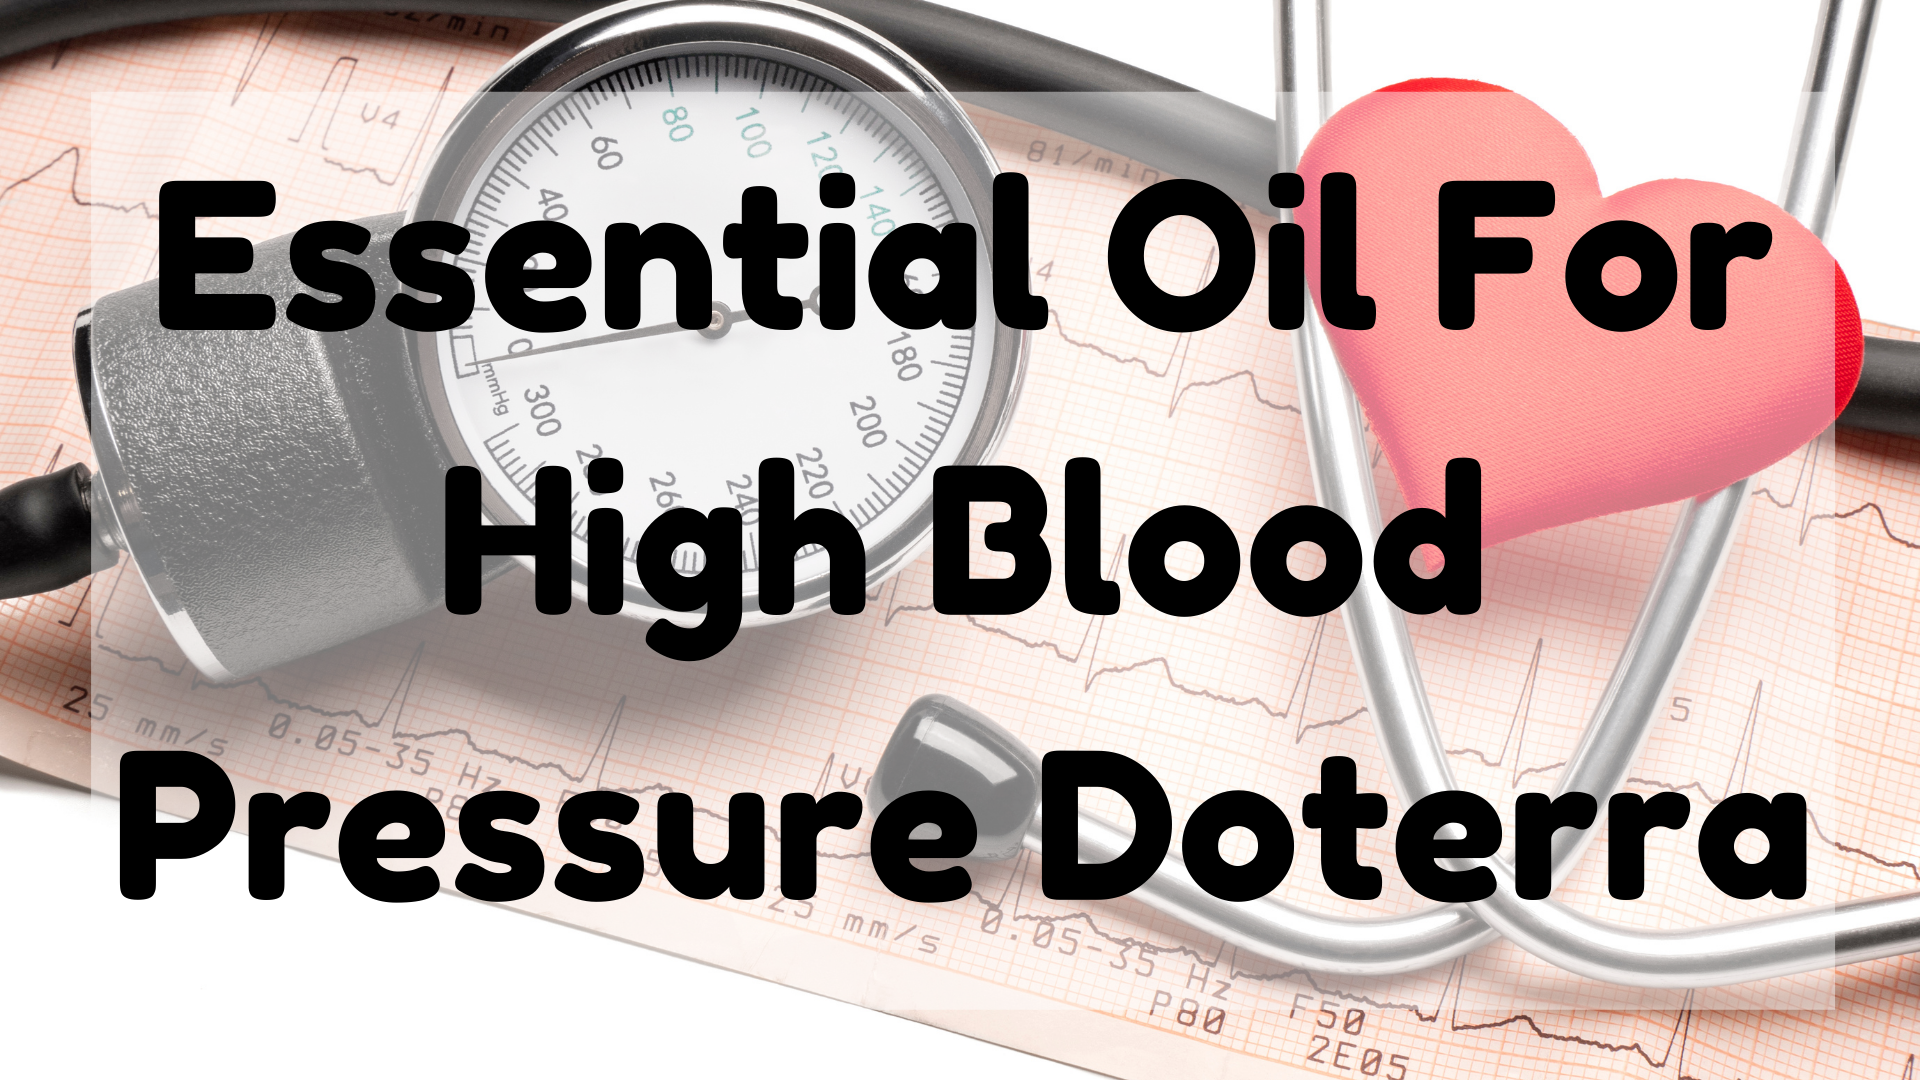 Essential Oil For High Blood Pressure Doterra